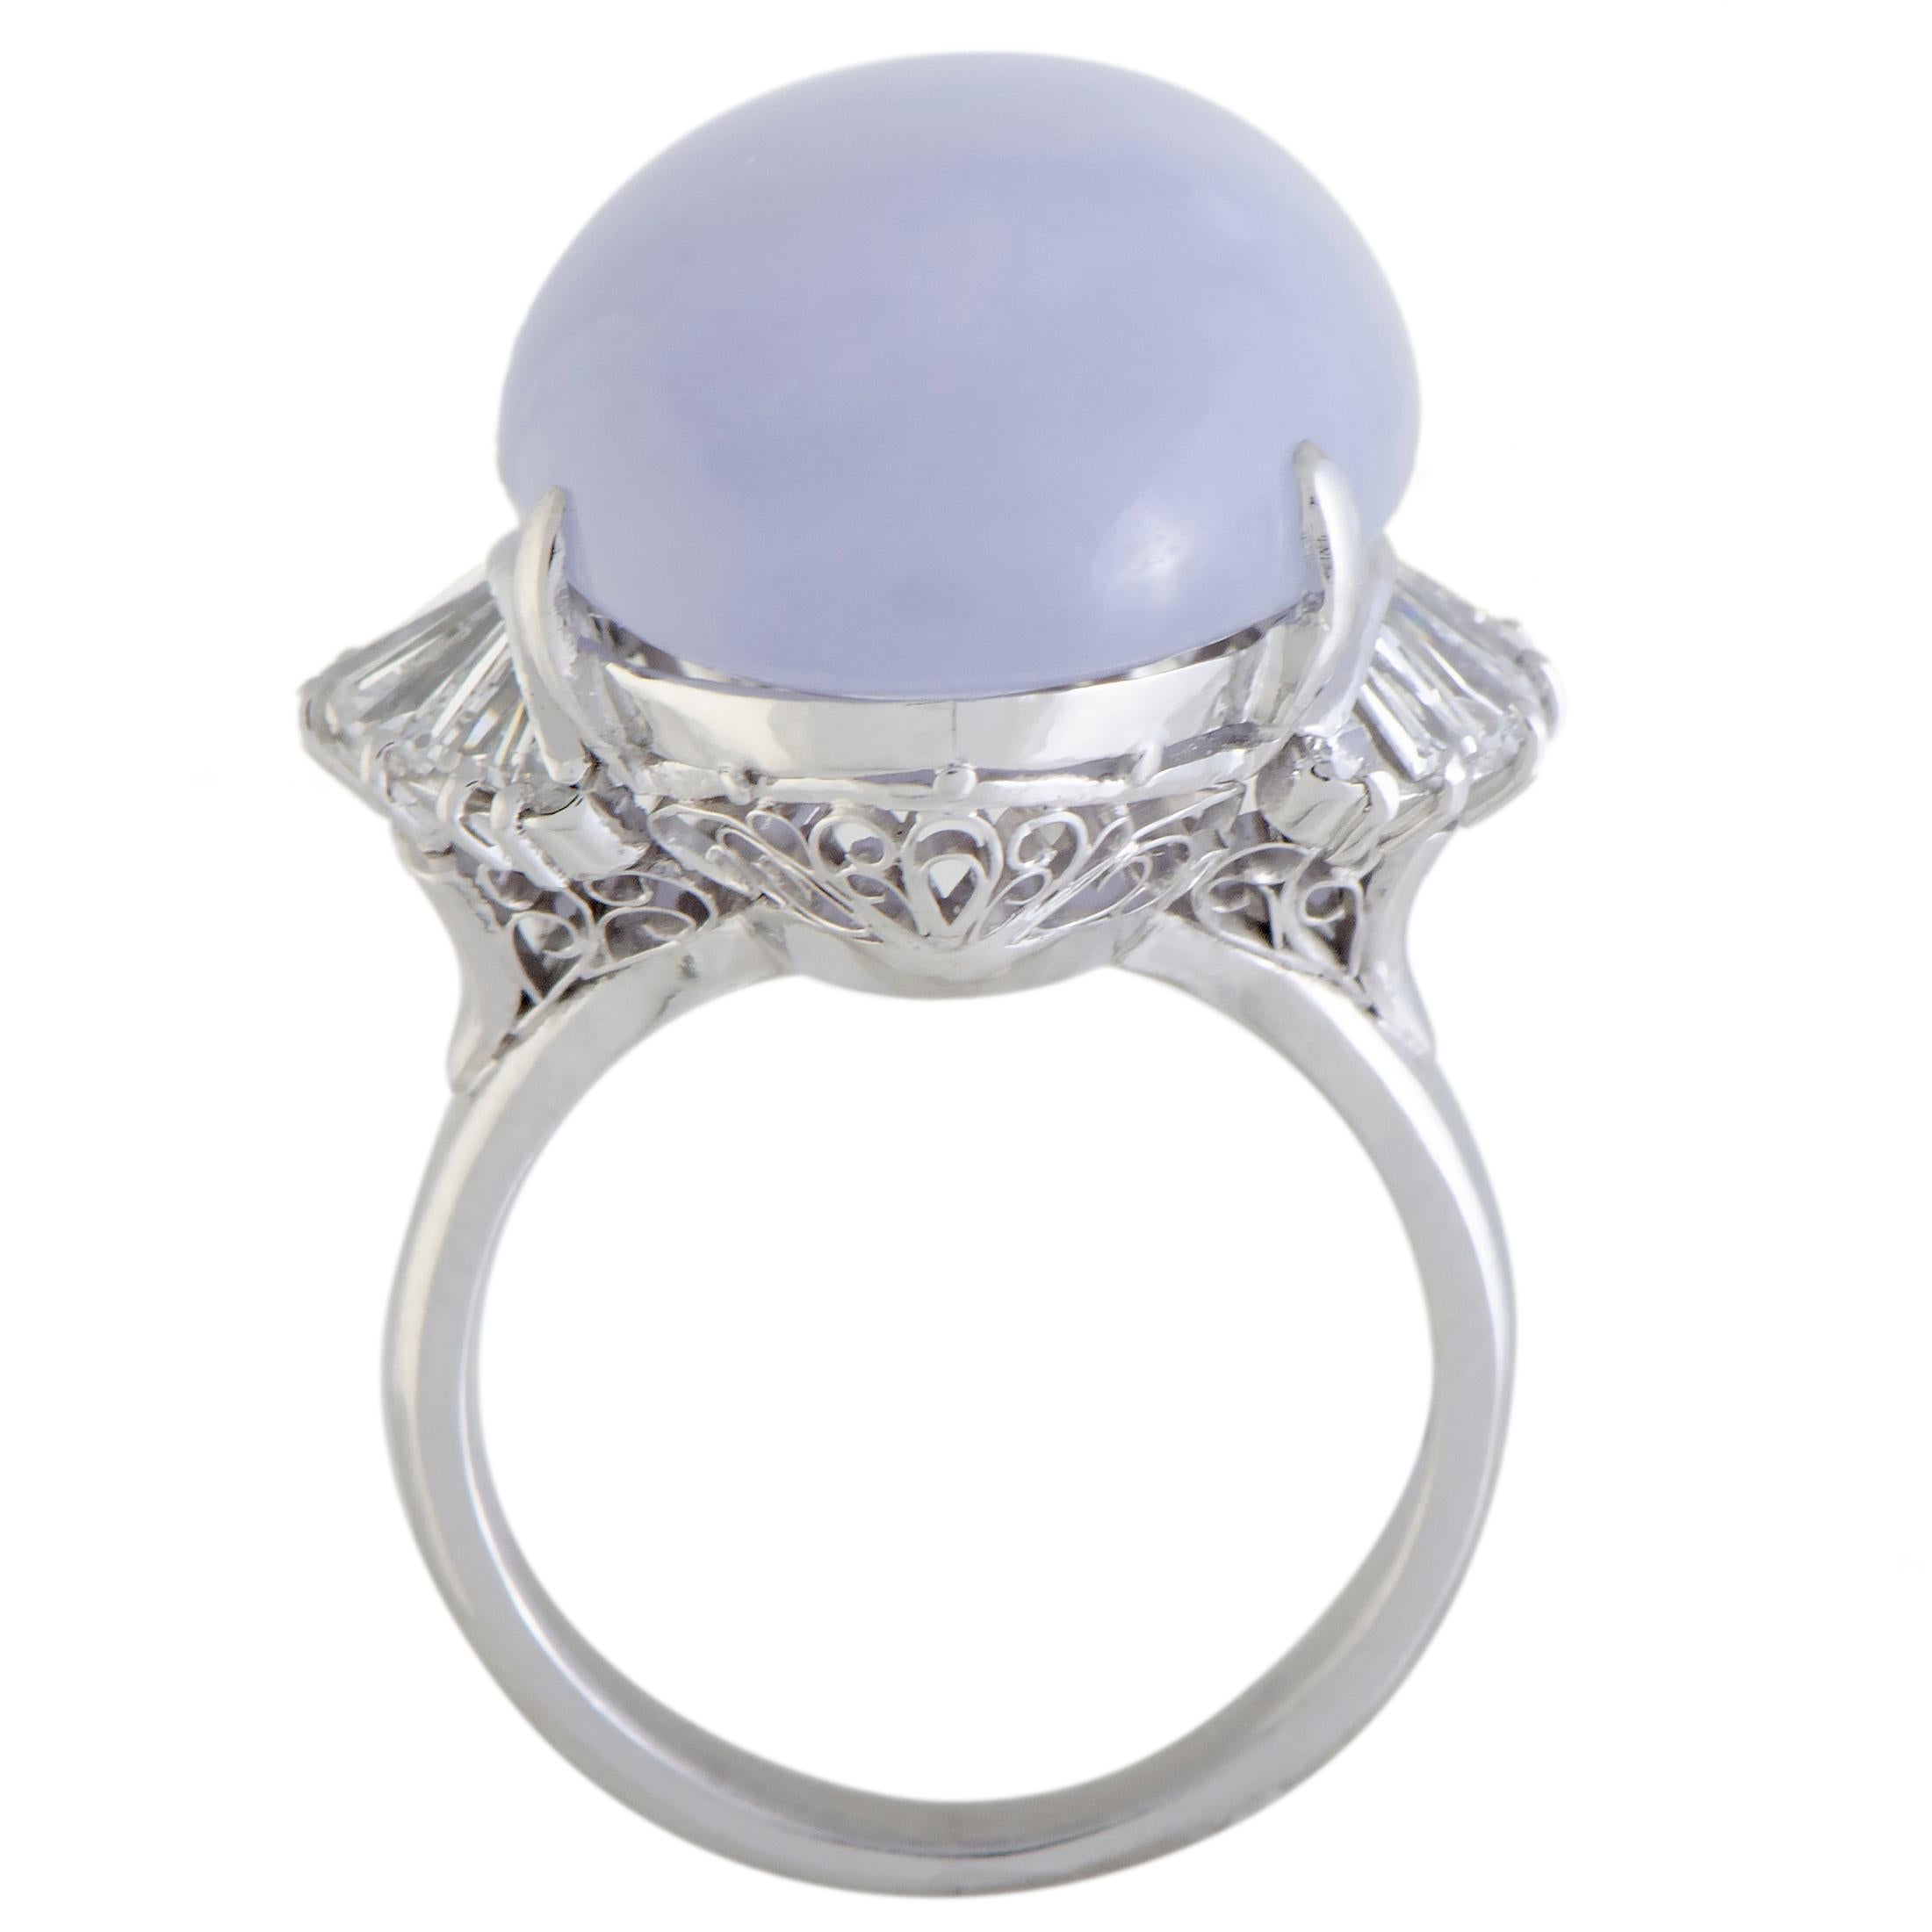 An appealing sense of ever-enticing femininity is present in this gorgeous jewelry piece, the result of combining the bright allure of platinum and diamonds with the sublime tone of lavender jade. The expertly cut jade weighs astounding 28.75